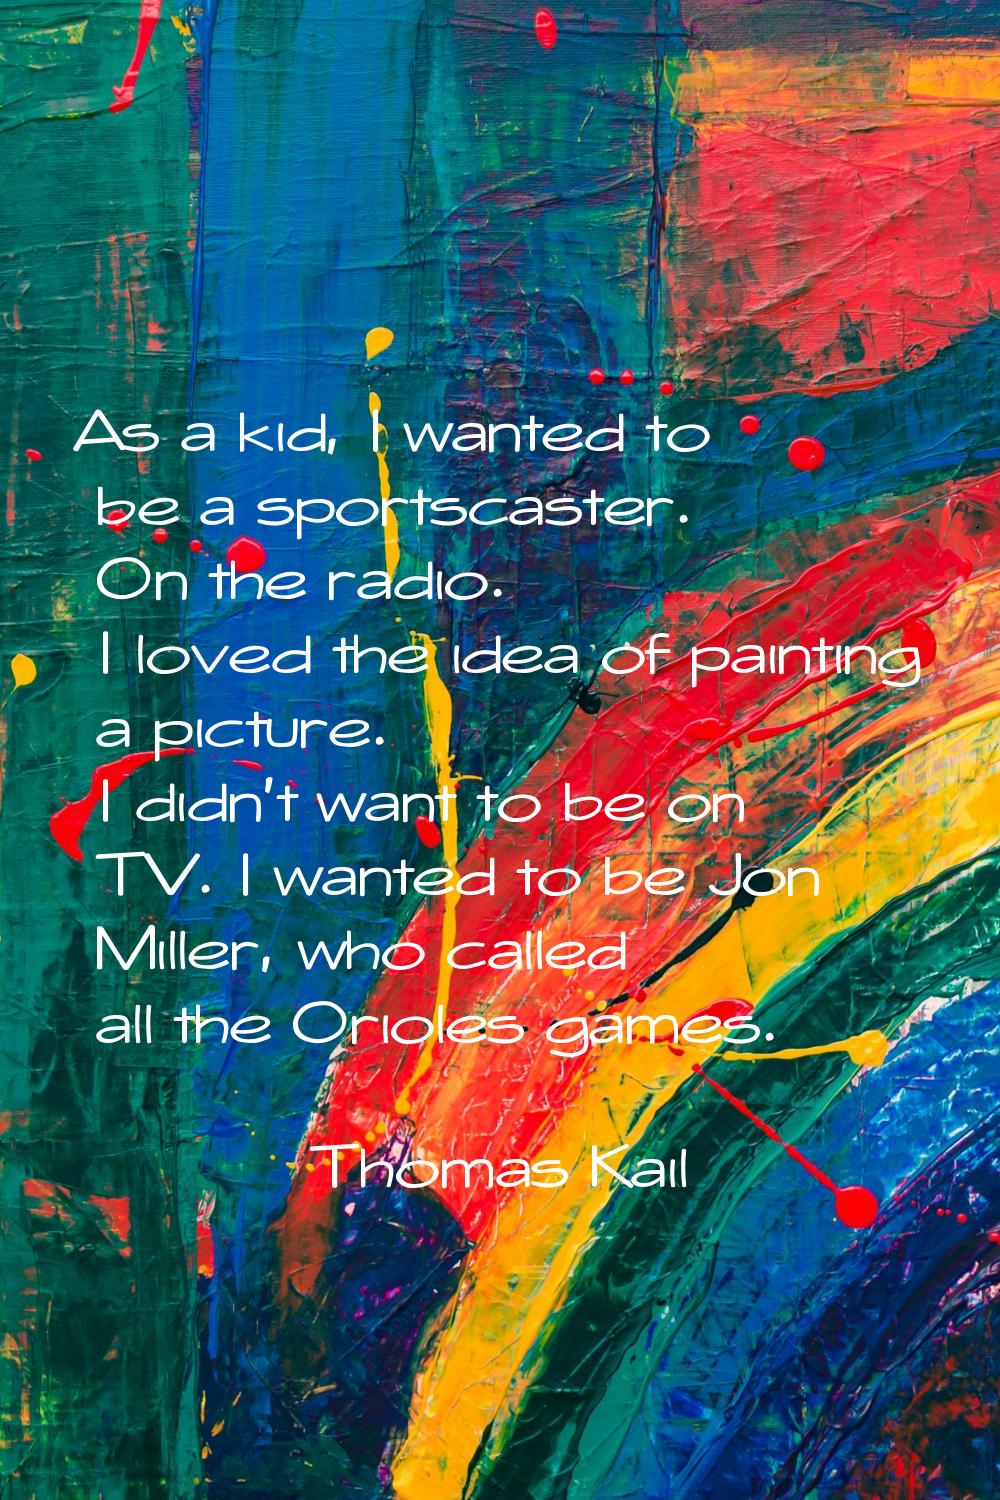 As a kid, I wanted to be a sportscaster. On the radio. I loved the idea of painting a picture. I di